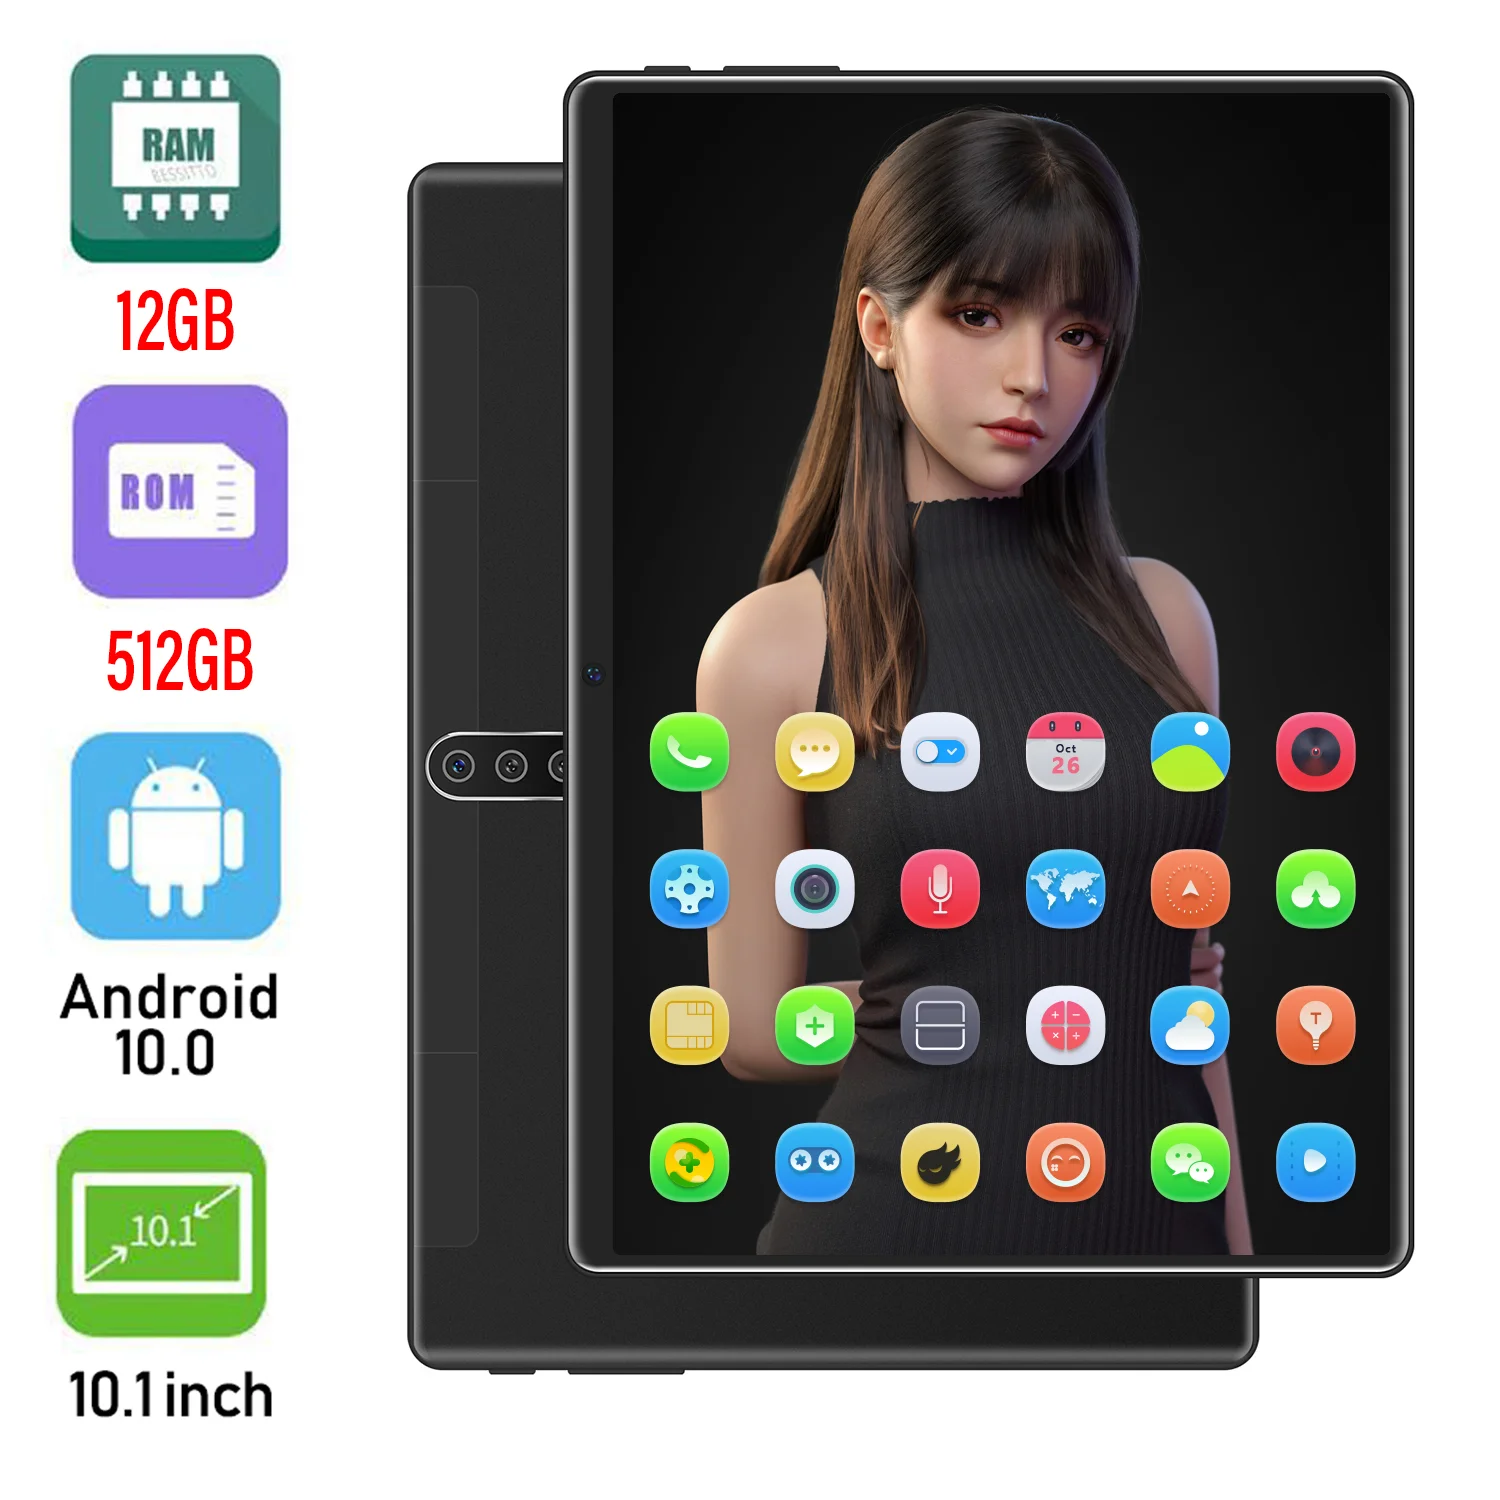 best cheap android tablet GPS Laptop WIFI Android Tablet 5G LTE Mini Pc 12GB+512GB Netbook 10.1 Inch Bluetooth 8800mAh Google Play 16MP+32MP Computer best graphic tablet